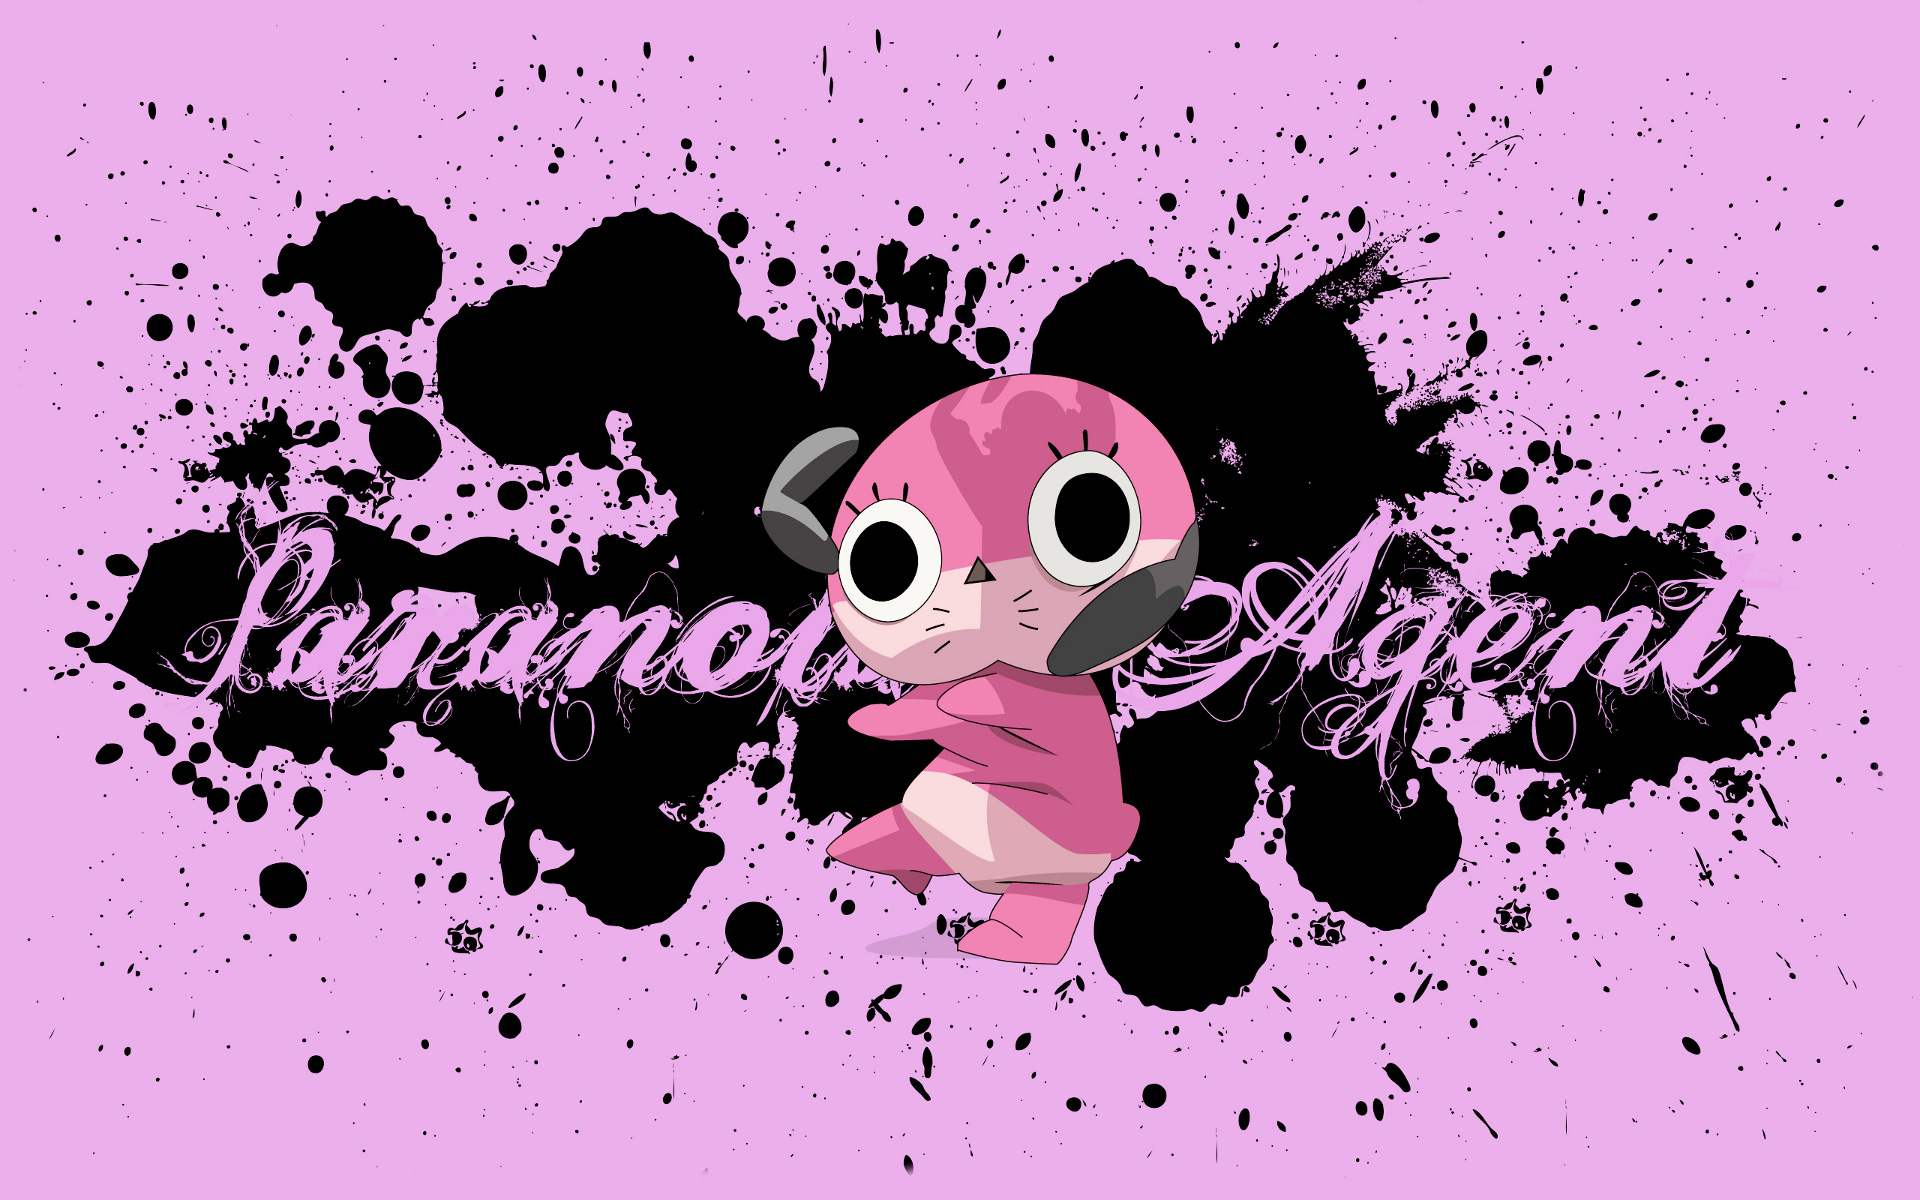 Paranoia Agent anime wallpaper titled Paranoia Agent Pink Wallpaper